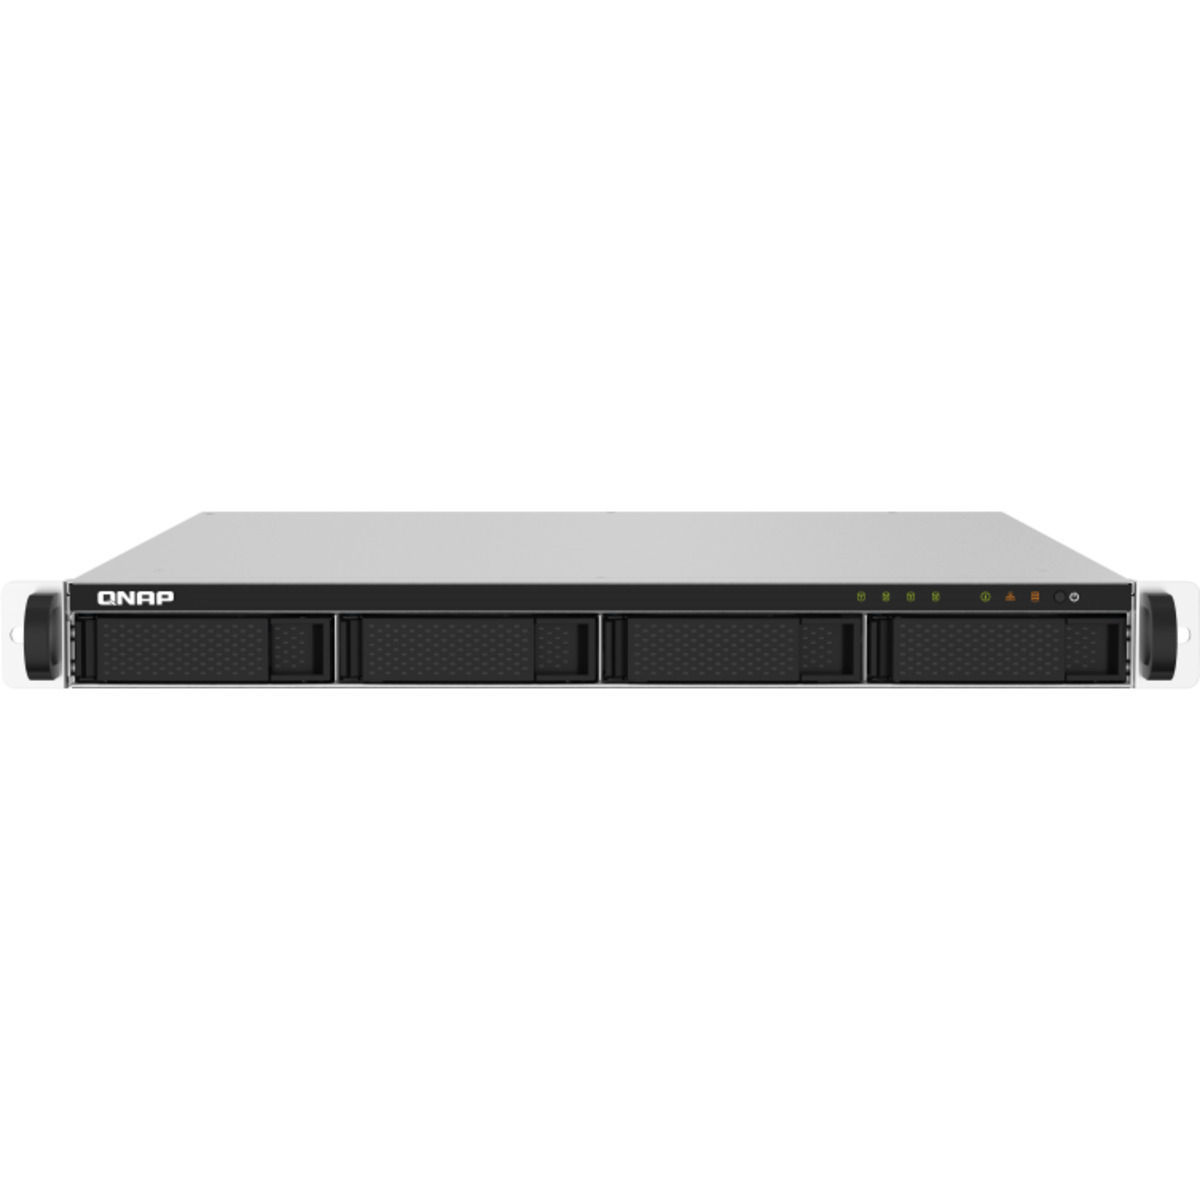 buy QNAP TS-432PXU-RP 16tb RackMount NAS - Network Attached Storage Device 4x4000gb Toshiba MN Series MN08ADA400E 3.5 7200rpm SATA 6Gb/s HDD NAS Class Drives Installed - Burn-In Tested - ON SALE - FREE RAM UPGRADE - nas headquarters buy network attached storage server device das new raid-5 free shipping usa spring sale TS-432PXU-RP